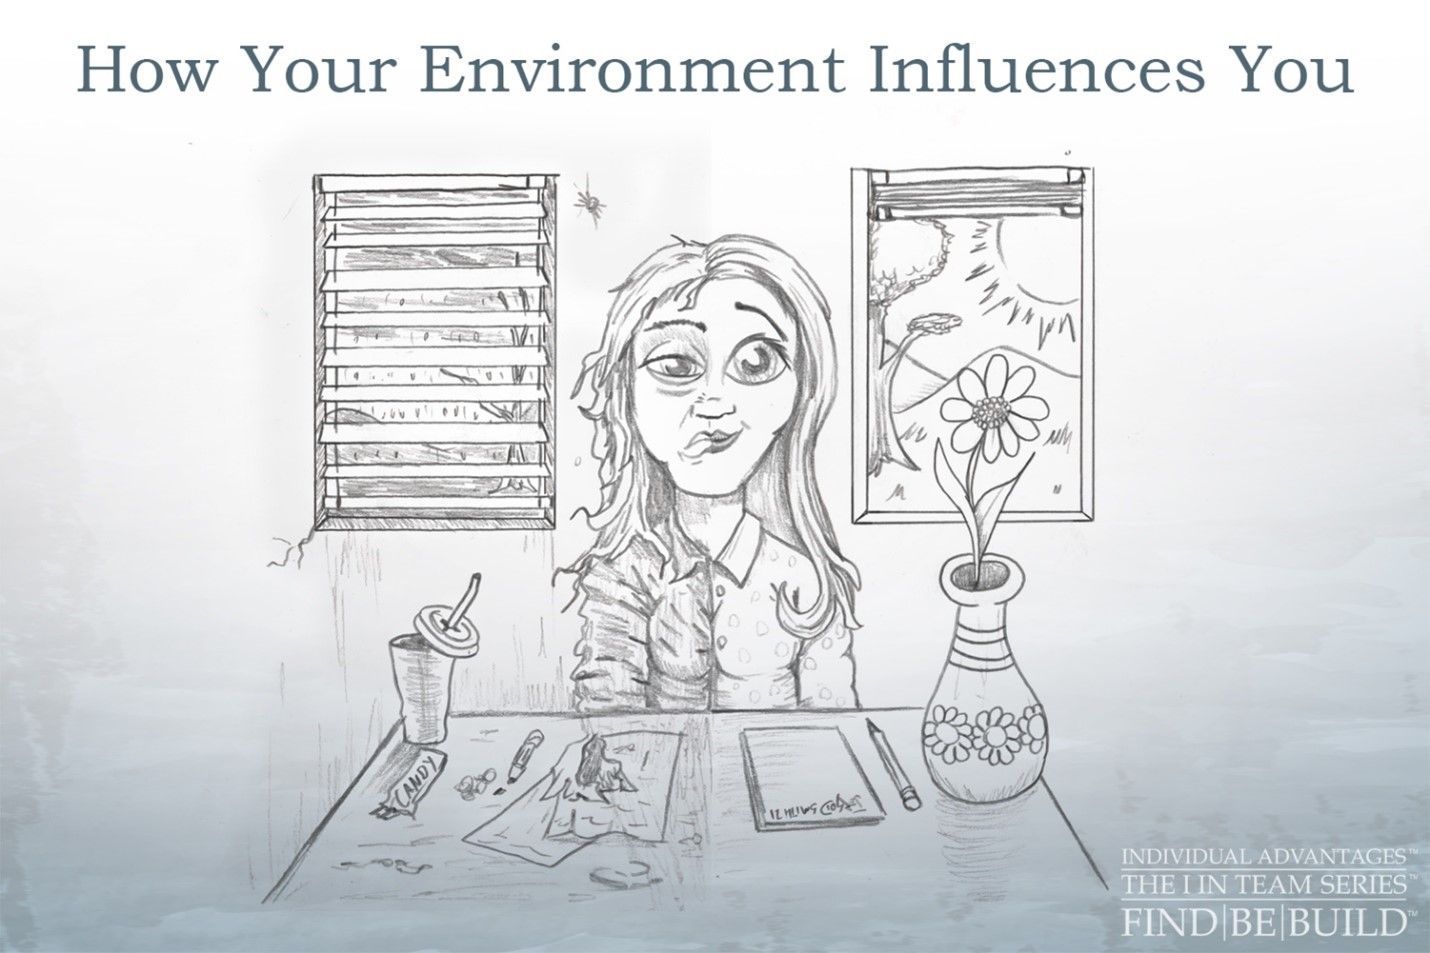 HOW YOUR ENVIRONMENT INFLUENCES YOU